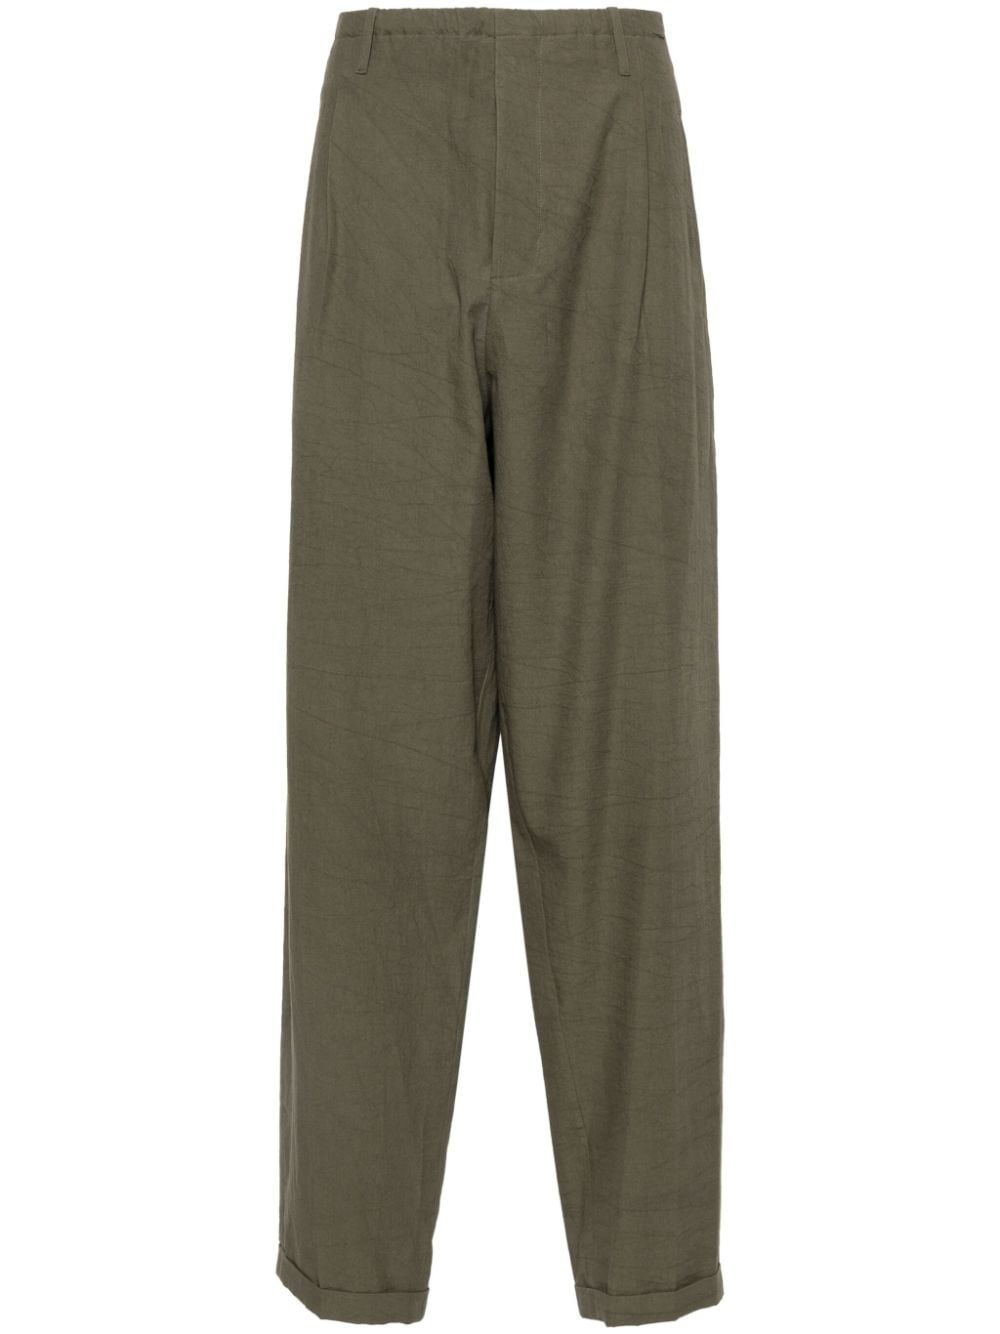 New People's twill trousers